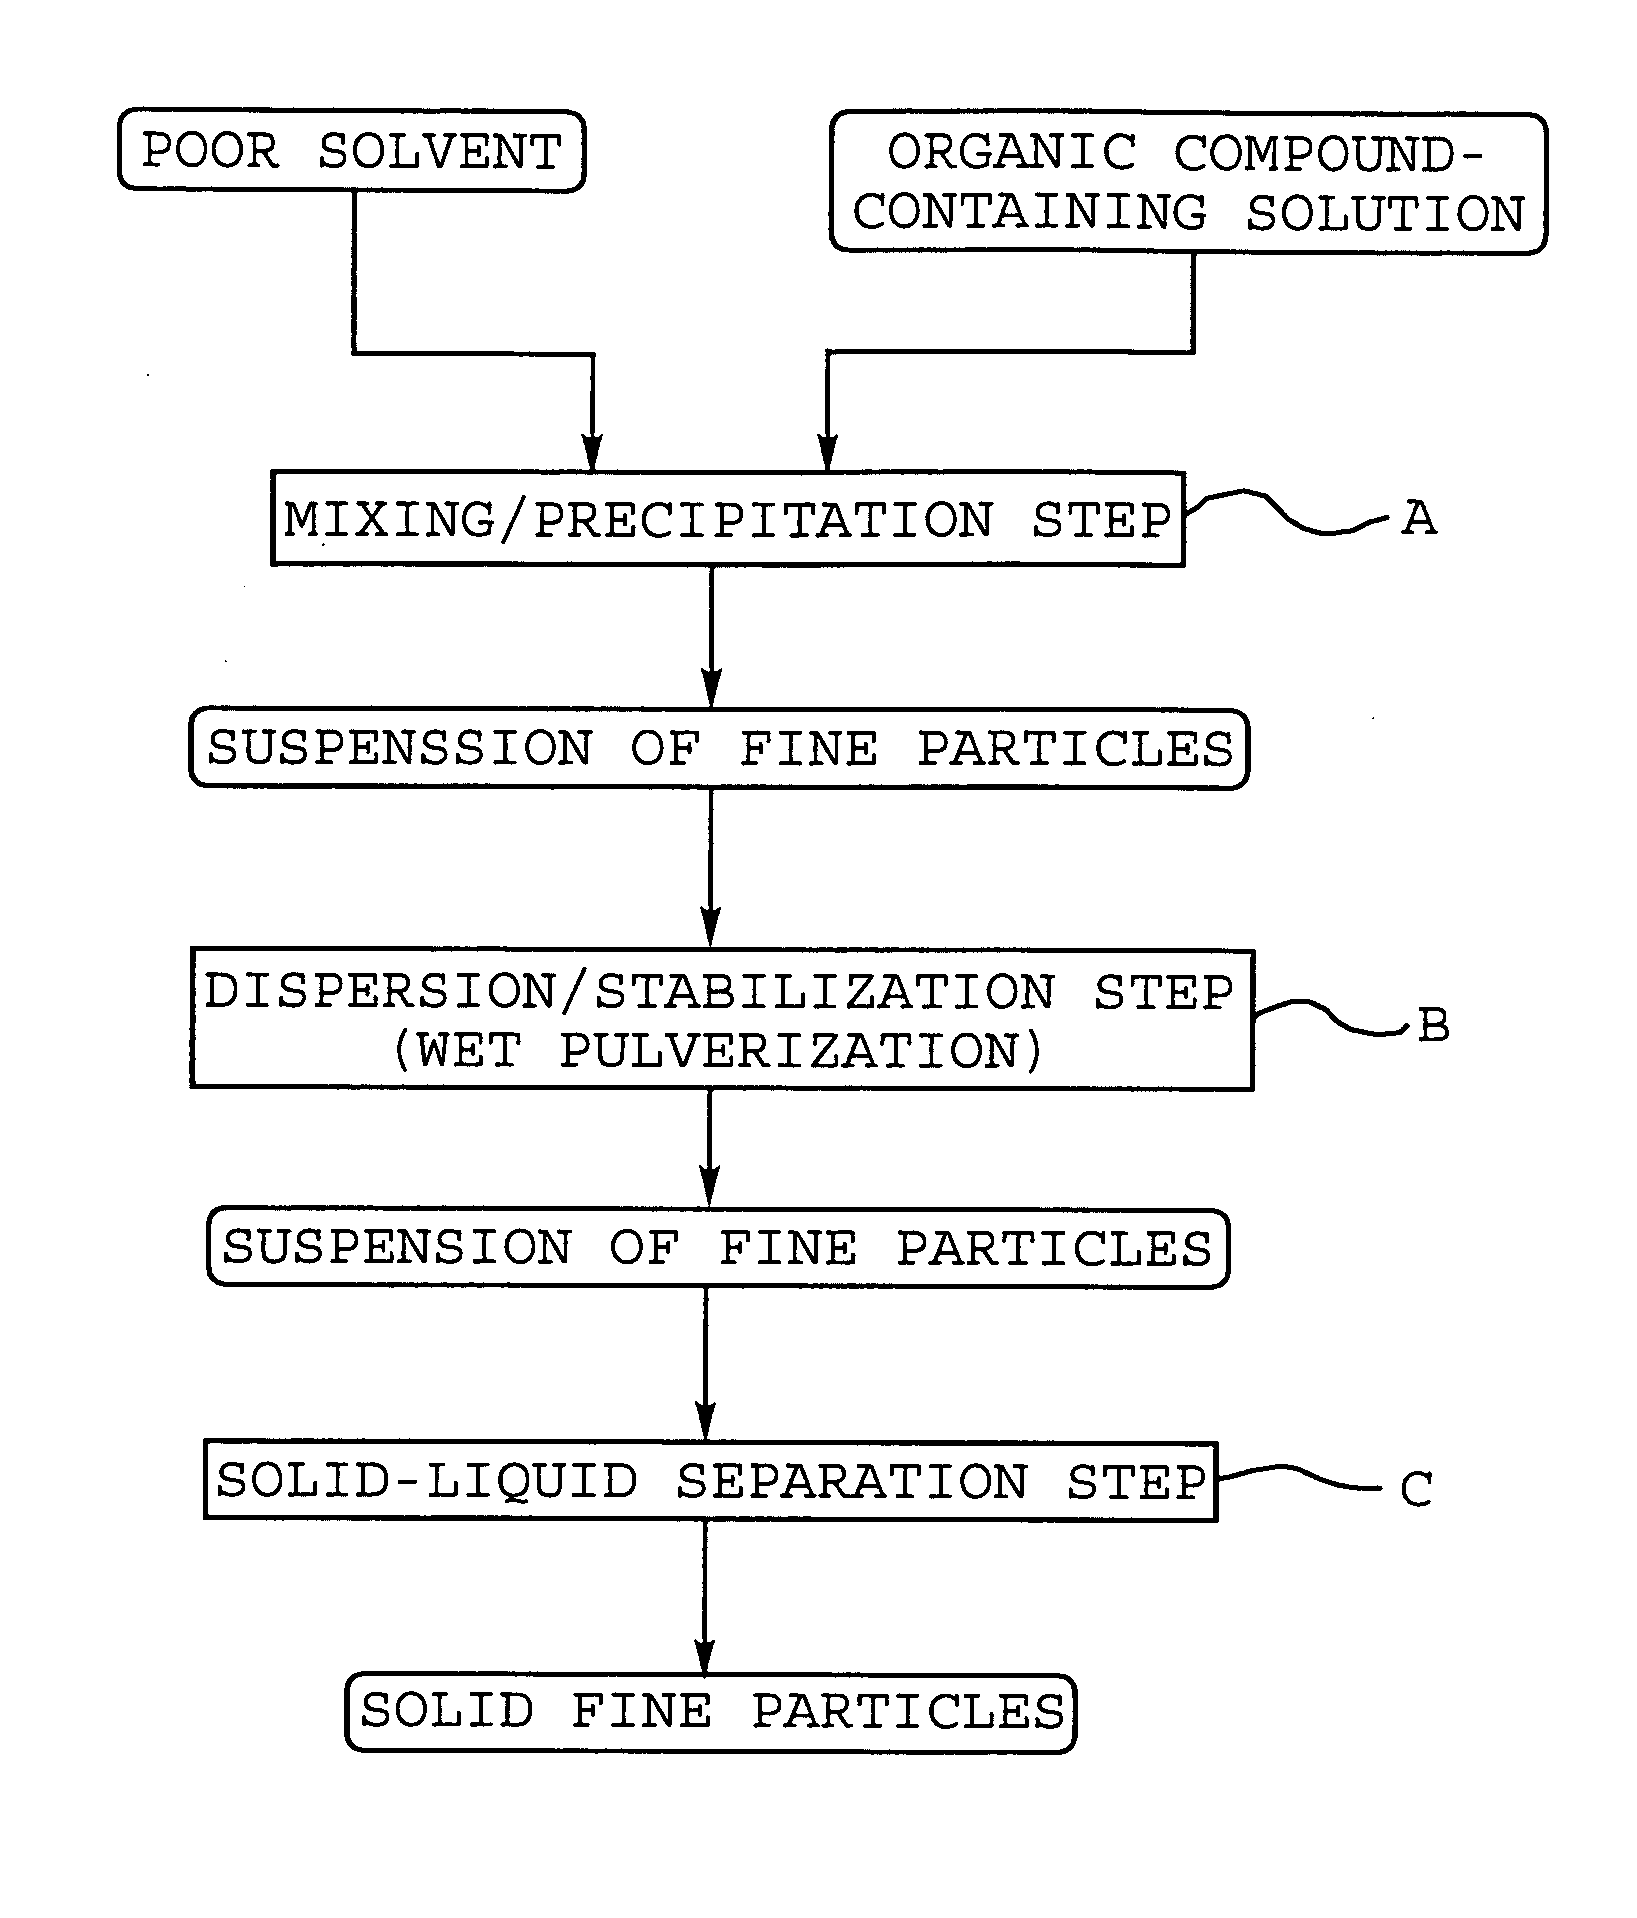 Process for producing fine particles of organic compound